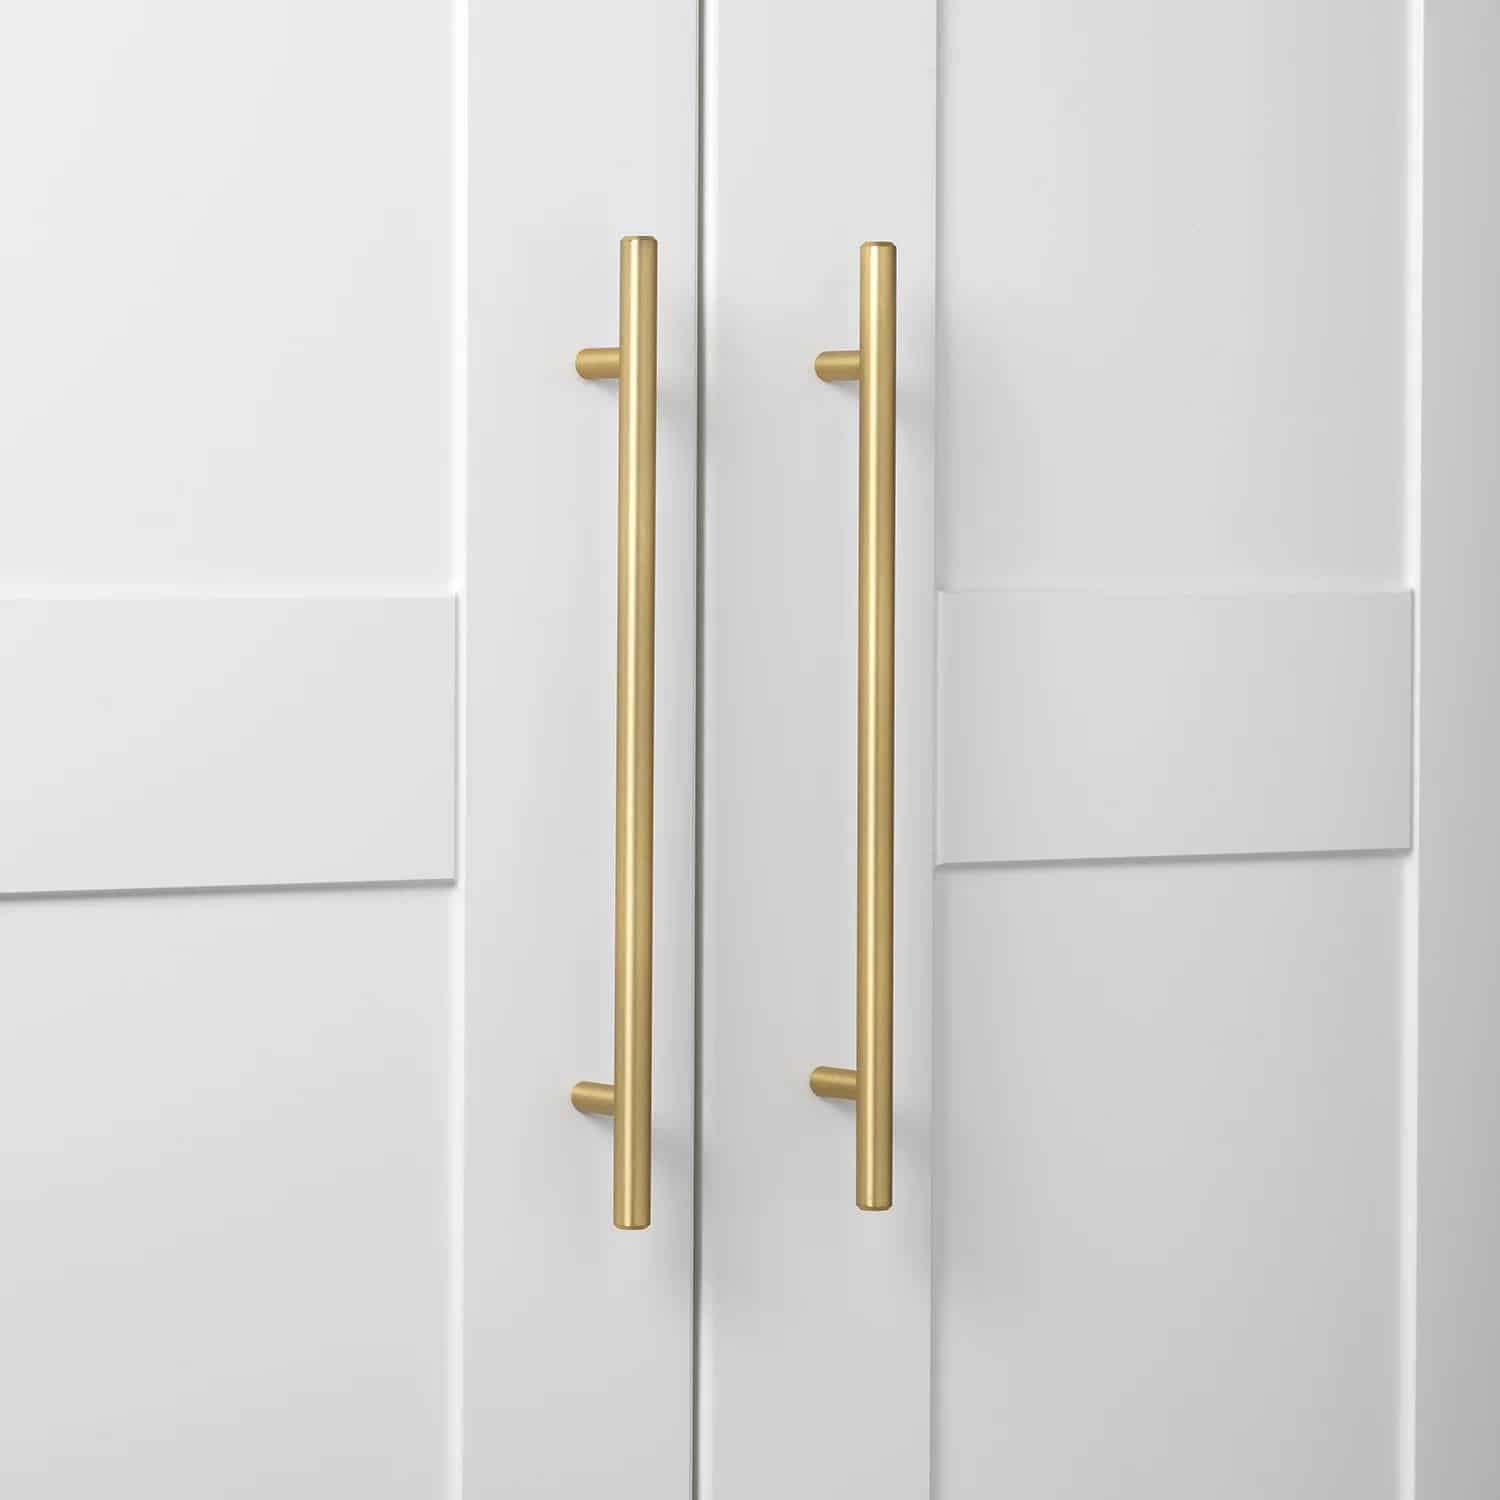 Long Golden Pulls Look Dashing On Shaker Cabinets